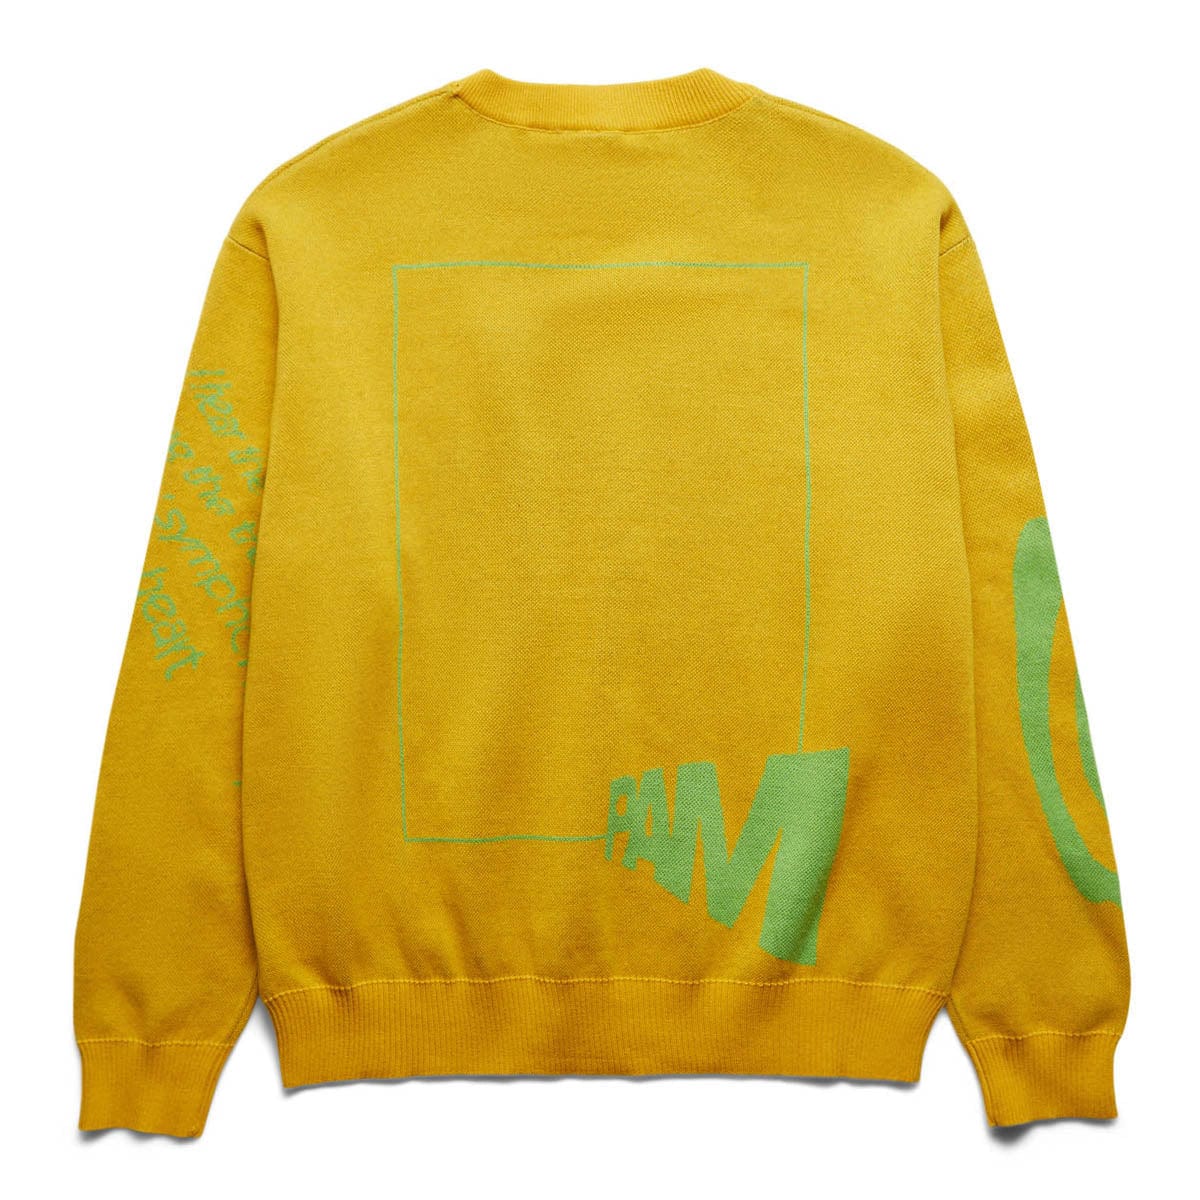 Perks and Mini Knitwear GREEN PARK WALK PEOPLE KNITTED CREW NECK